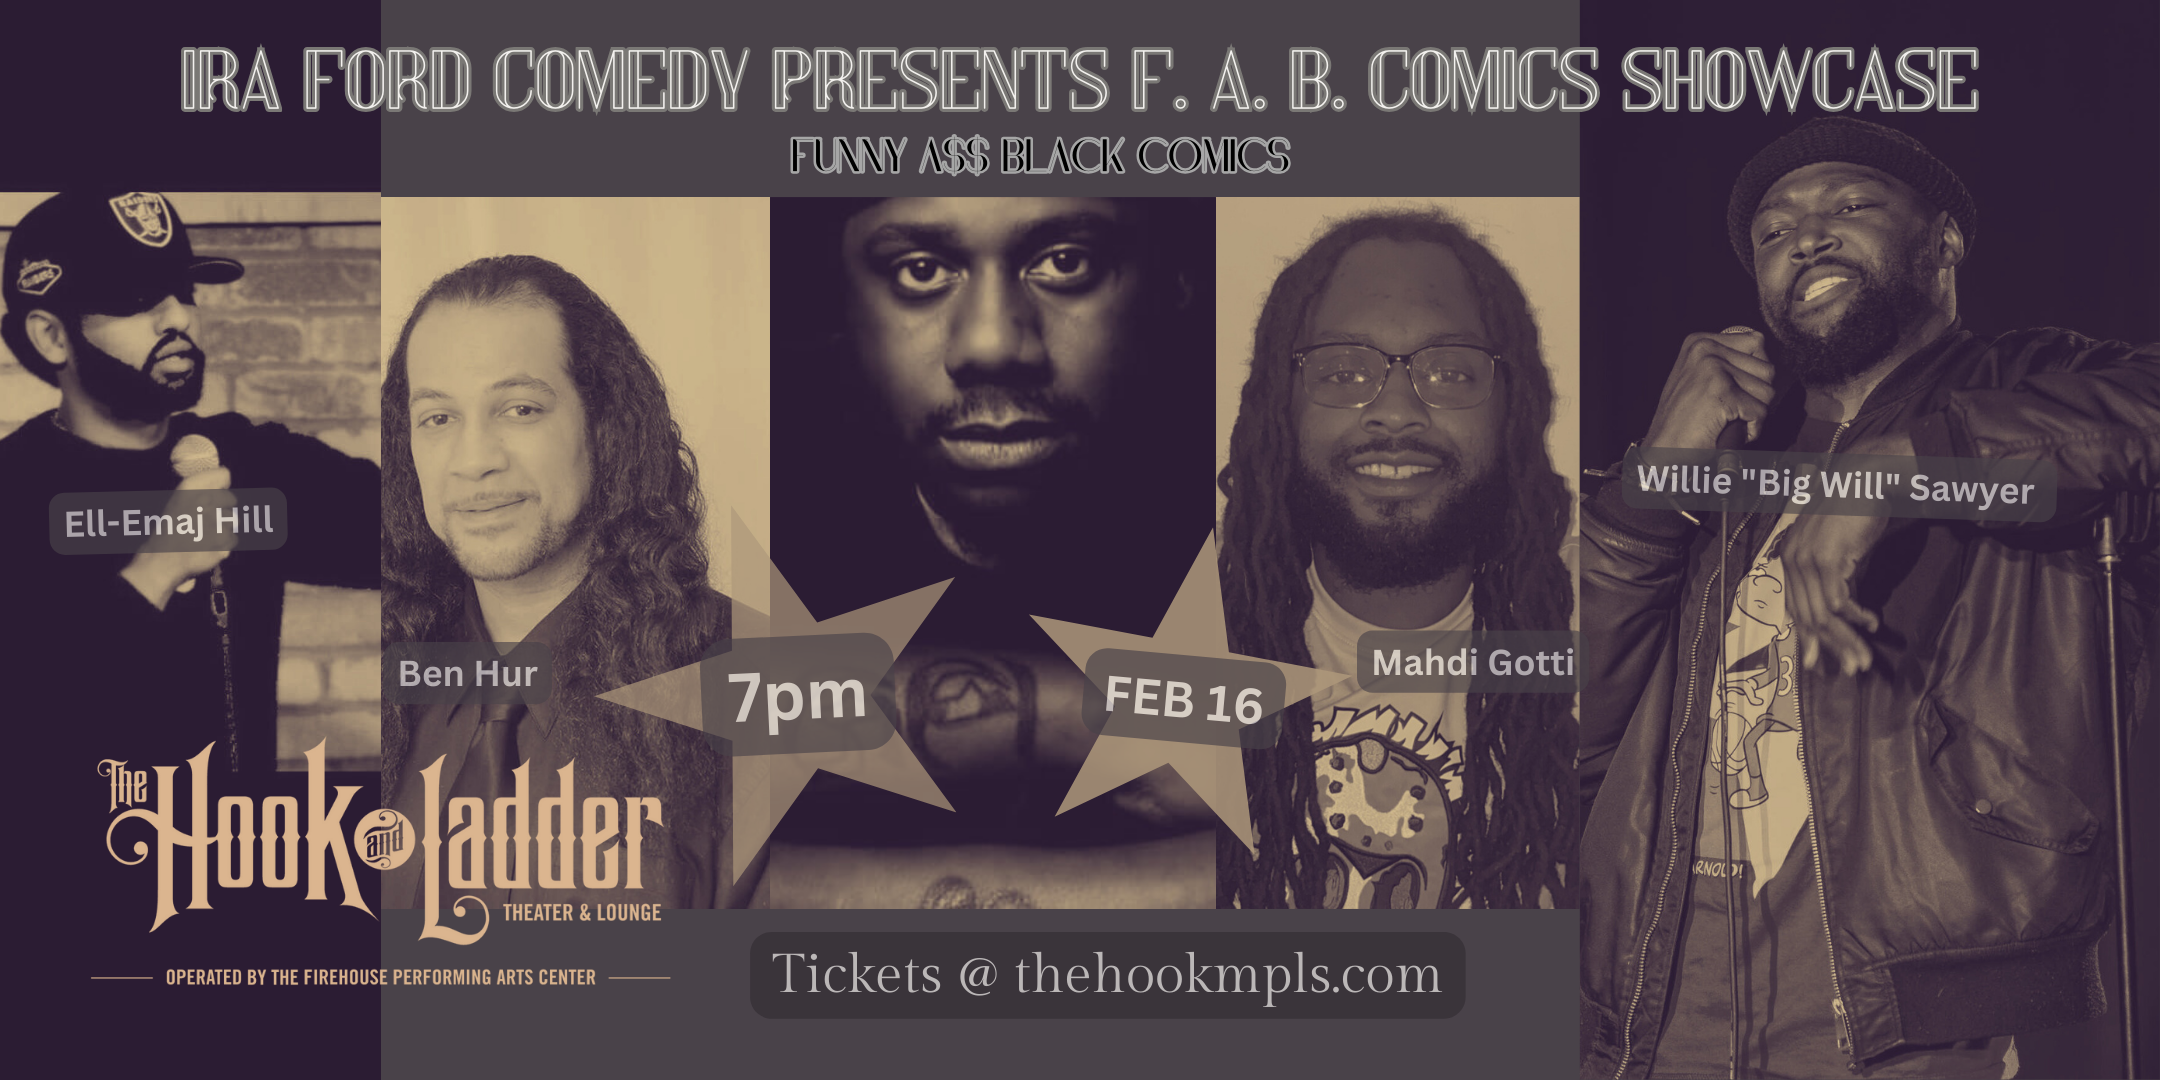 Ira Ford Comedy Presents: F.A.B. Comics Showcase Friday, February 16 The Hook and Ladder Theater Doors 7:00pm :: Show 8:00pm :: 21+ GA Seat: $25* Standing Room Only (SRO): $15 ADV / $20 DOS *Seating Available On A First-come First-served Basis